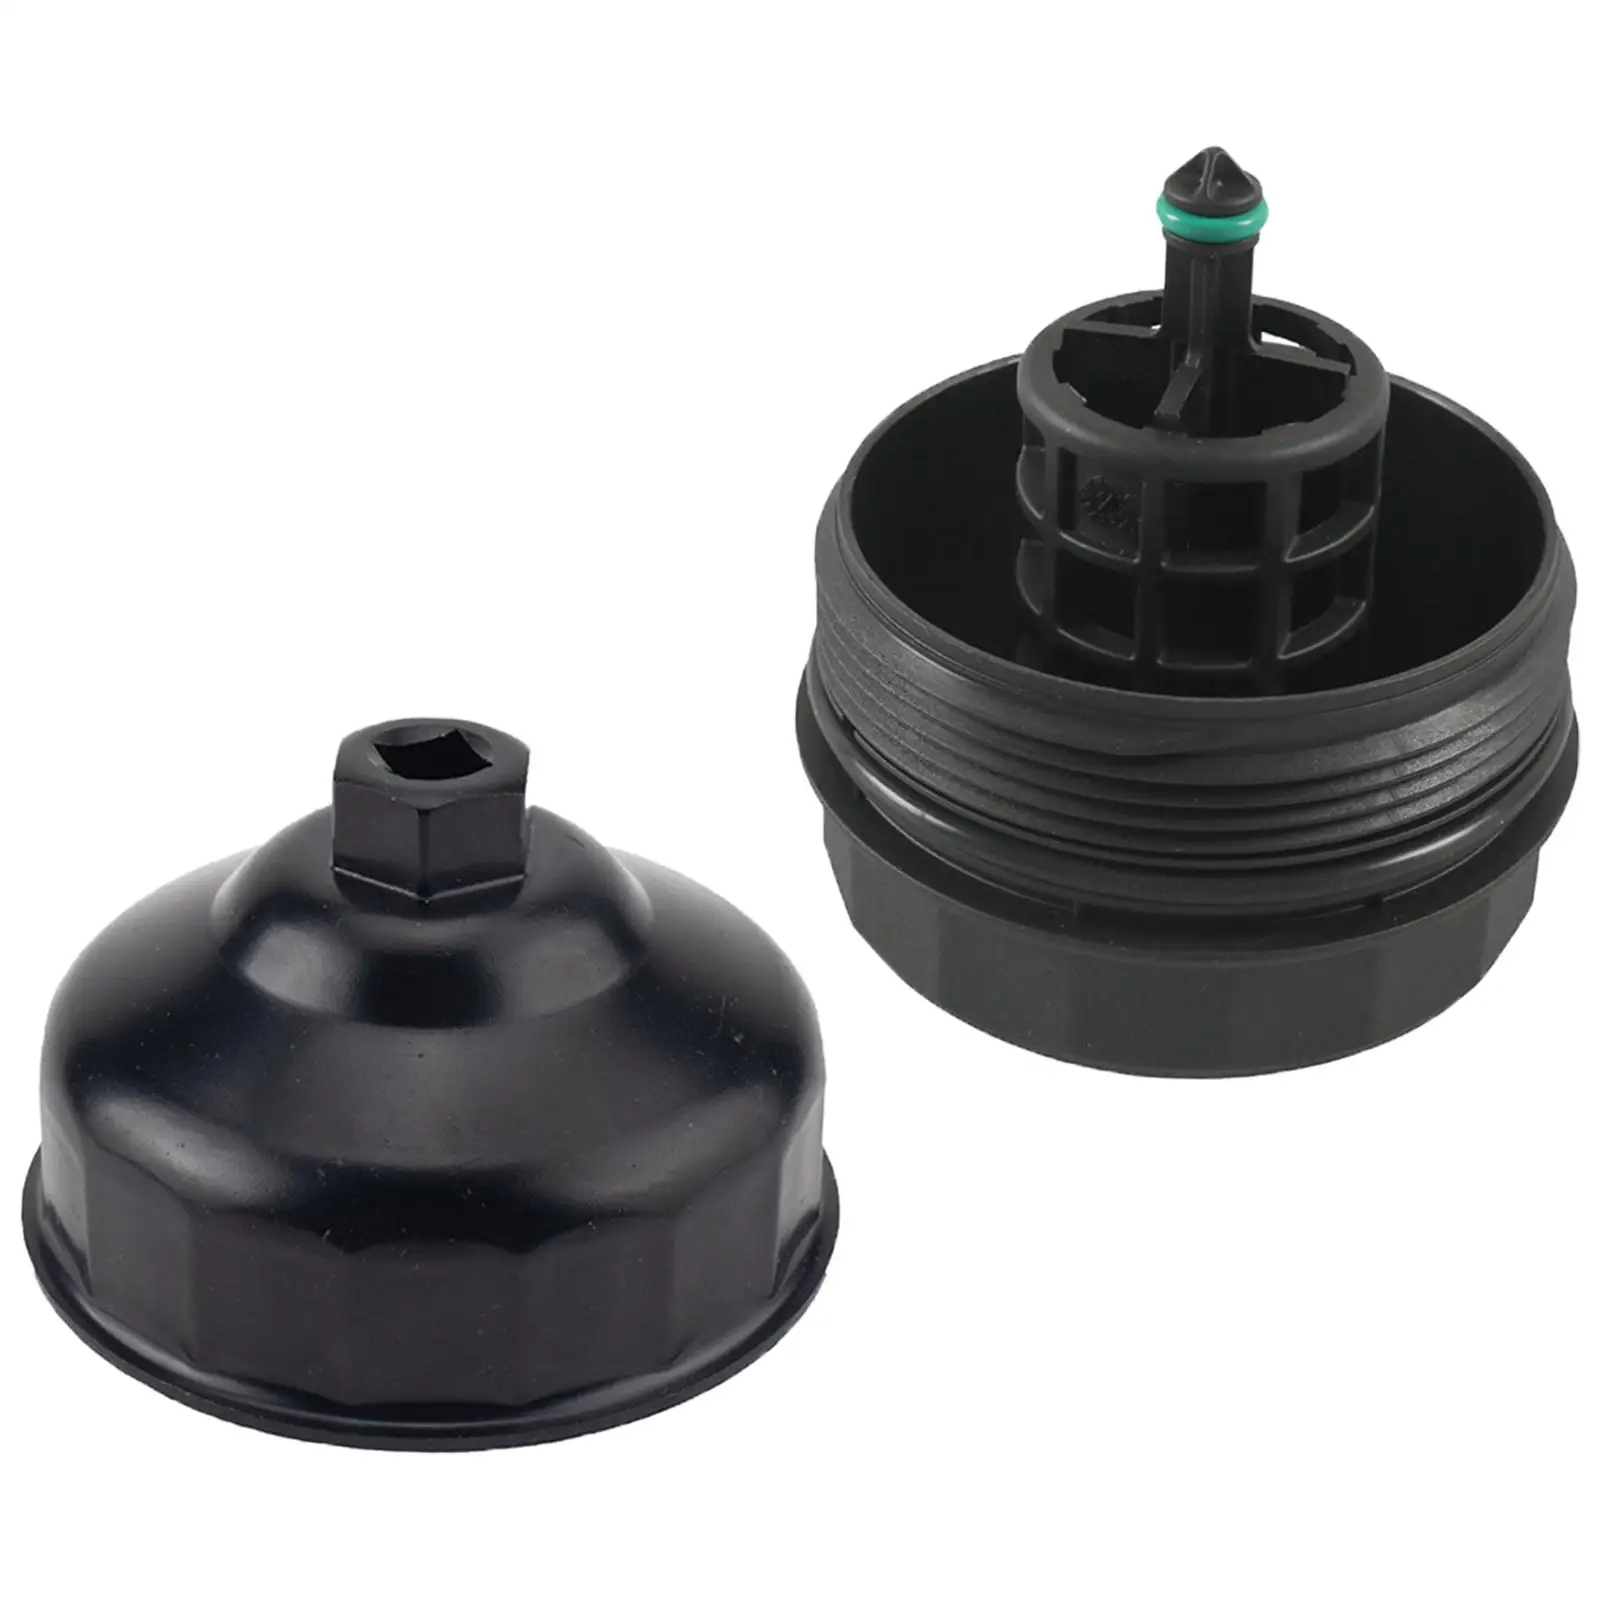 Oil Filter Housing Cover Caps 11427525334 Replace Fits for BMW 525Xi 528i 328i 328i 328Xi Z4 335IS 335Xi